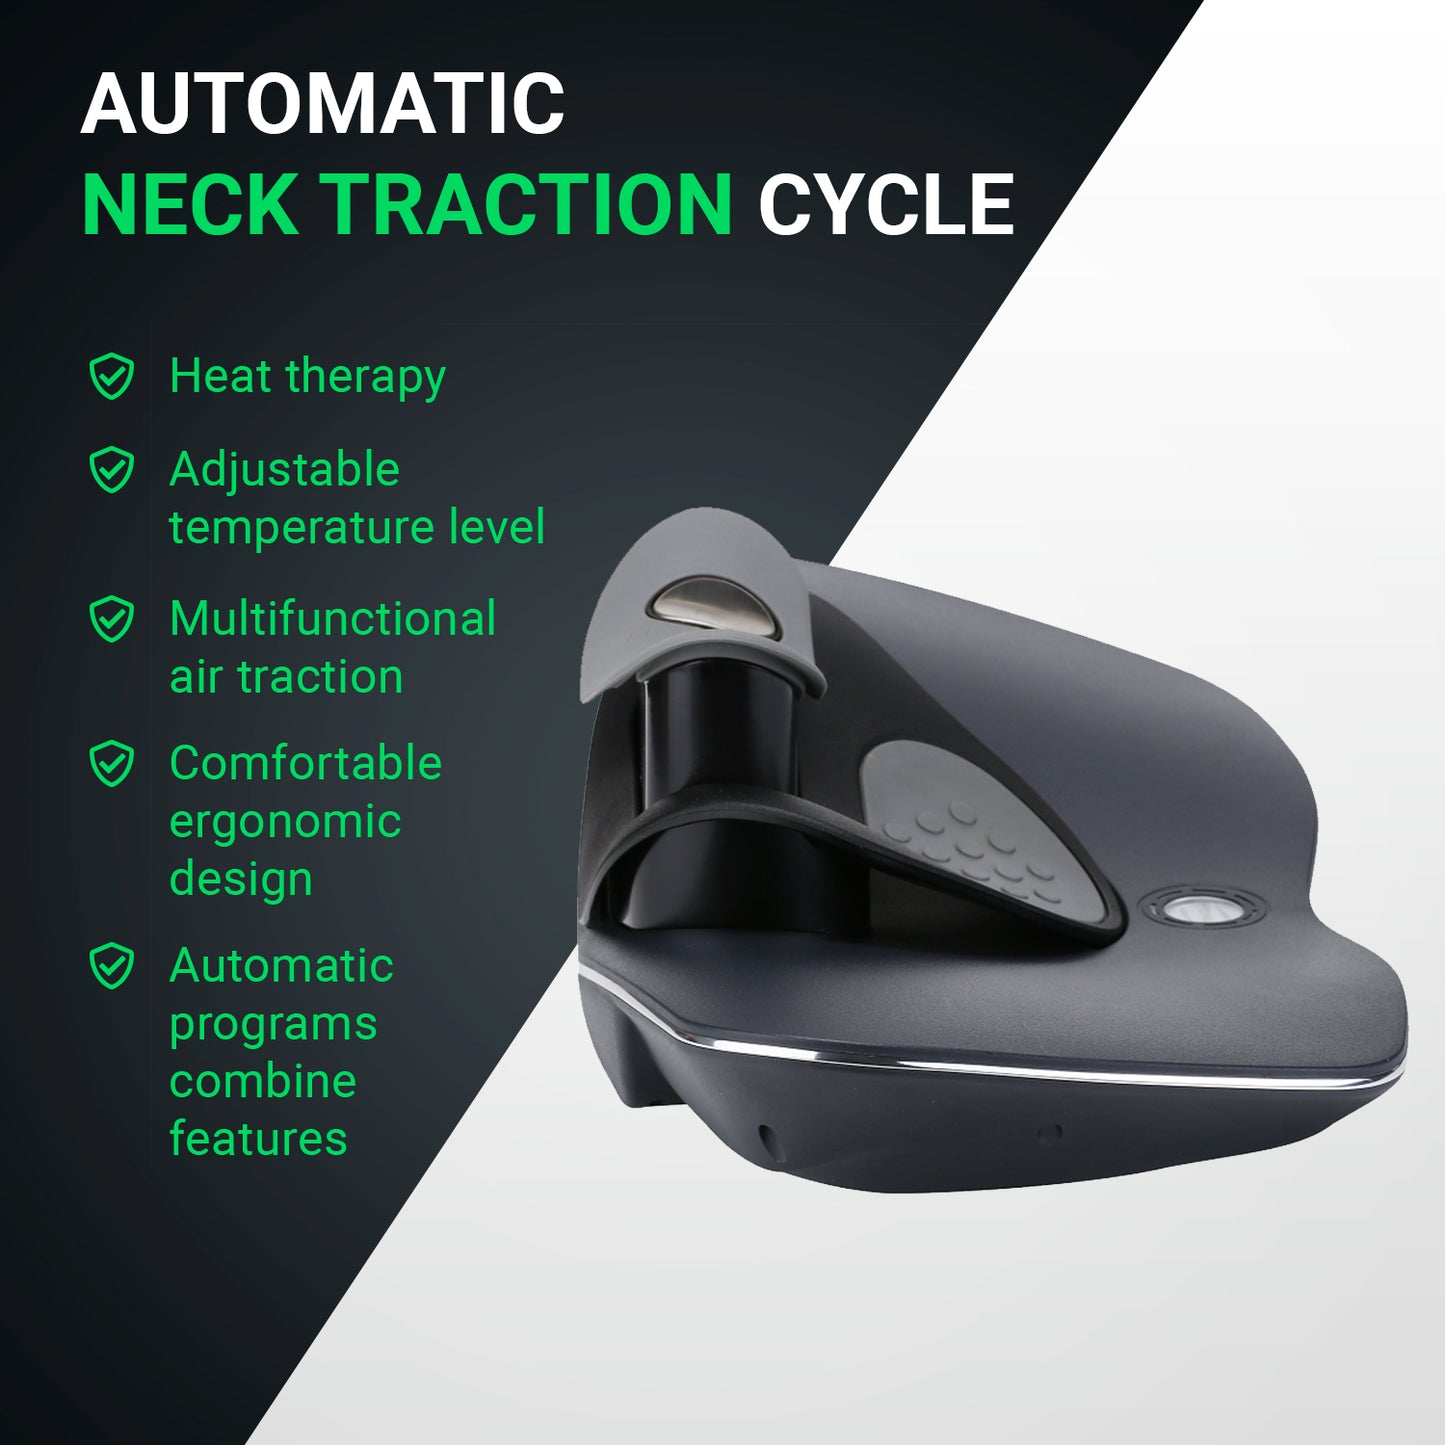 Neck Traction Cycle